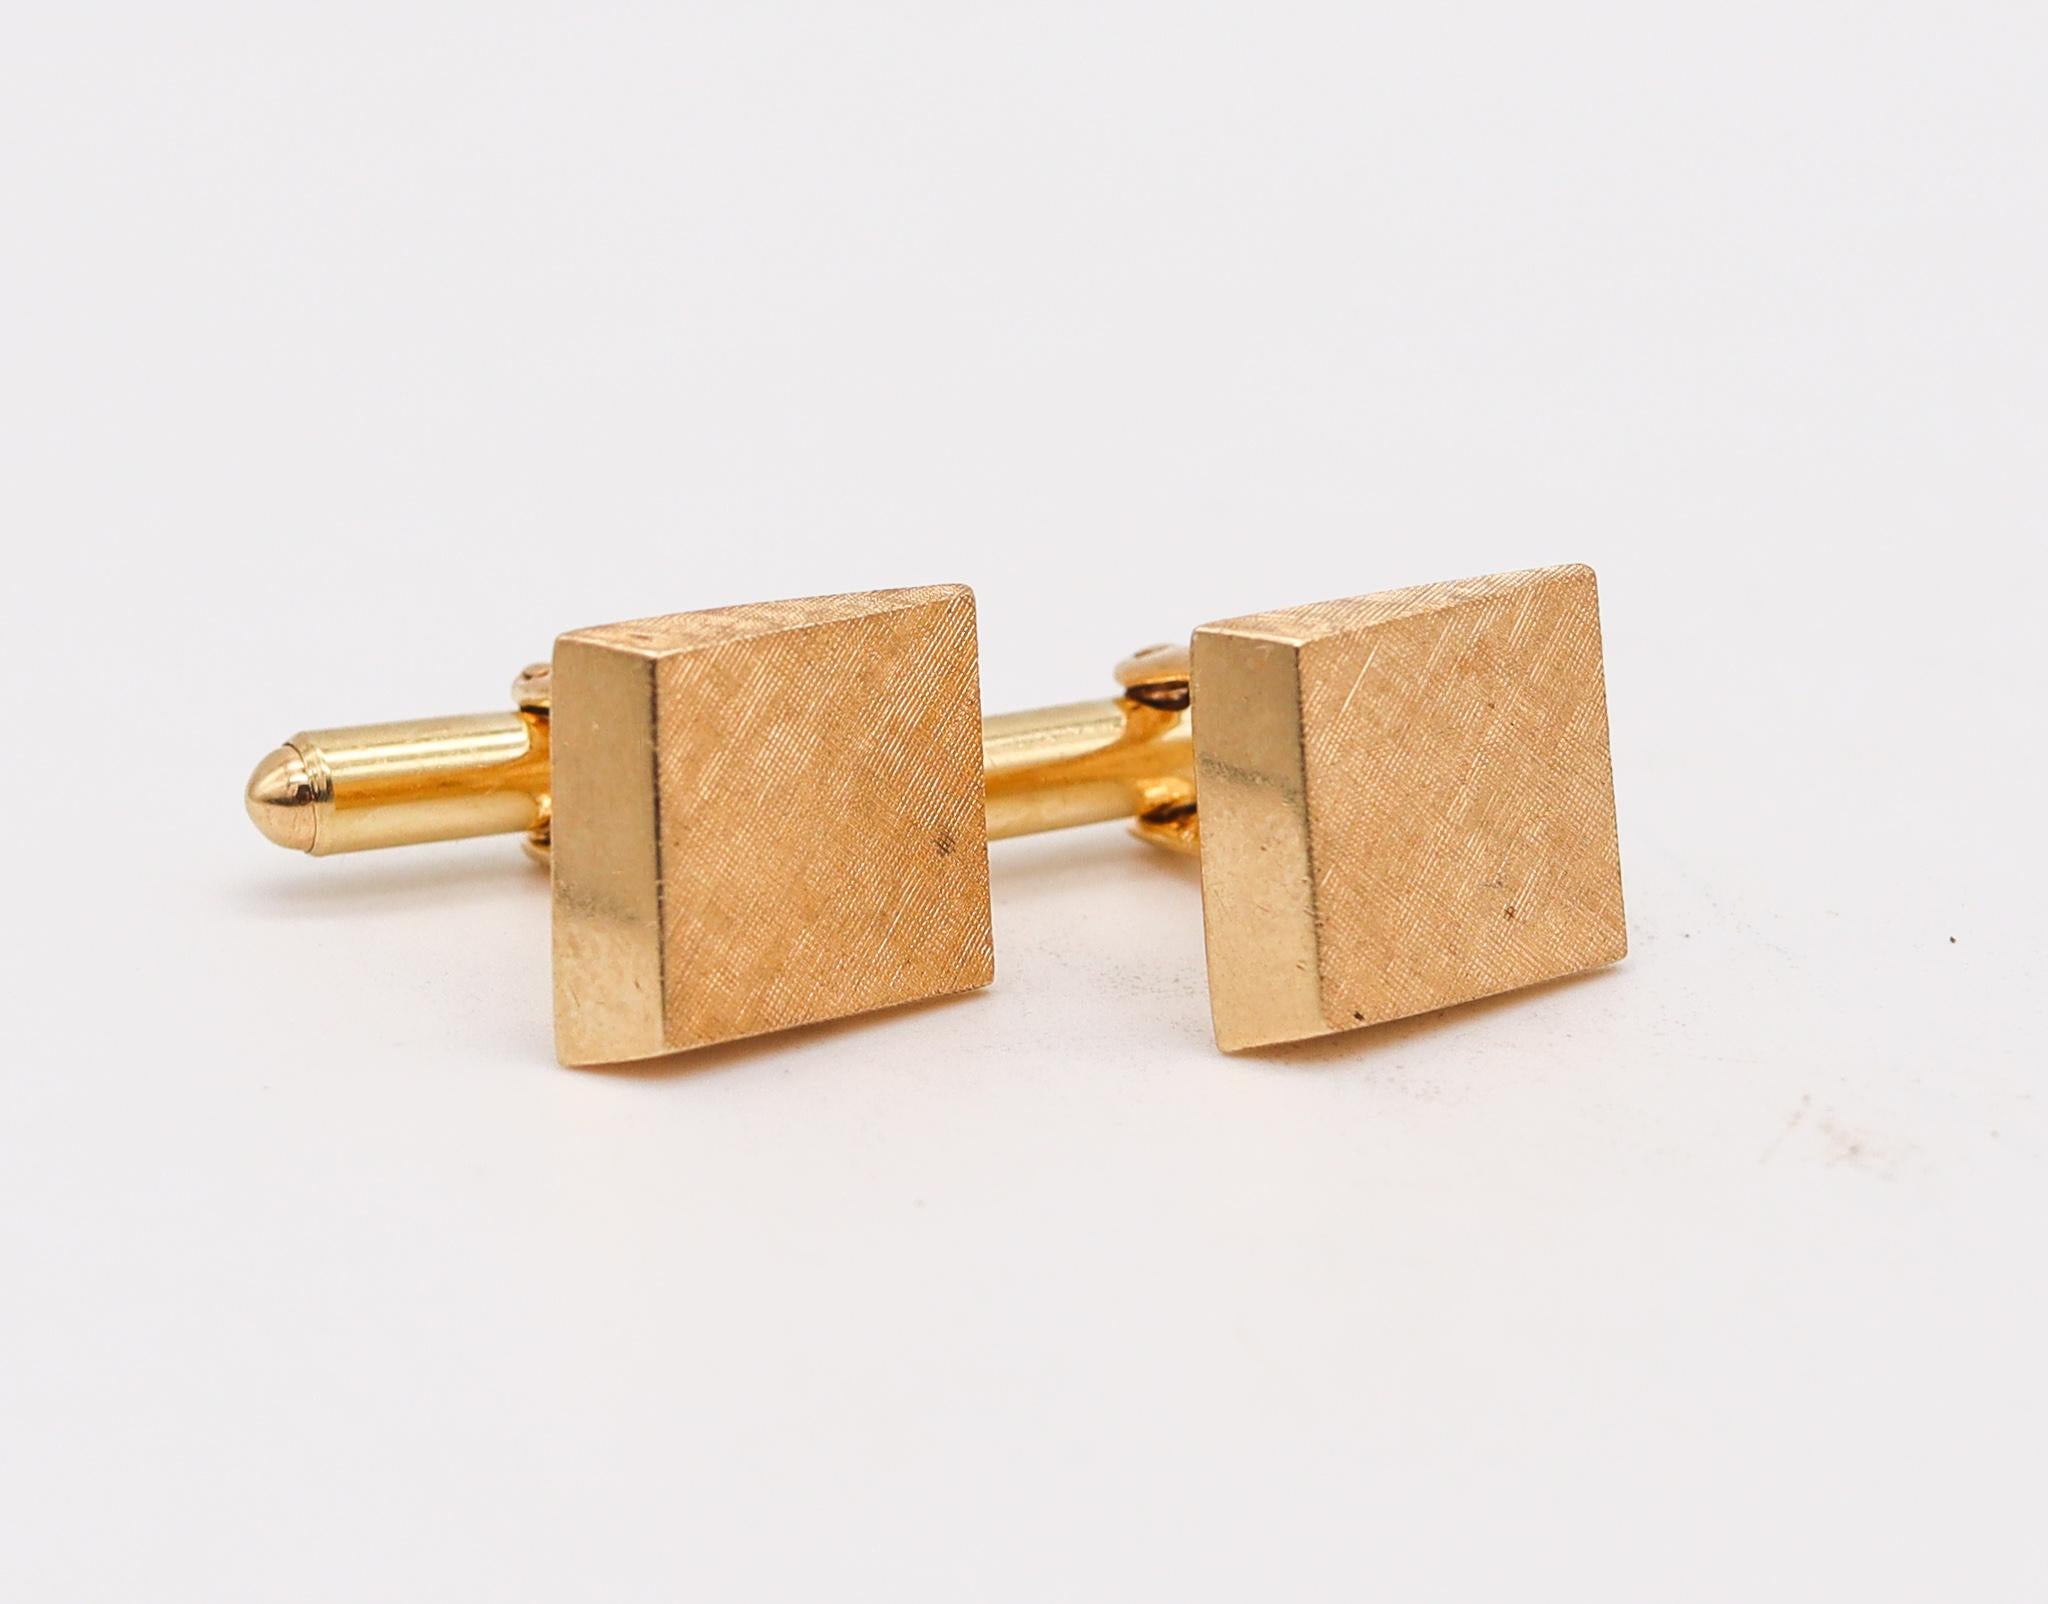 Modernist cufflinks designed by Cartier.

Gorgeous pair of retro modernist cufflinks, created by the house of Cartier, back in the 1970. This pair was crafted with a minimalist three dimensional shape in solid yellow gold of 14 karats with brushed